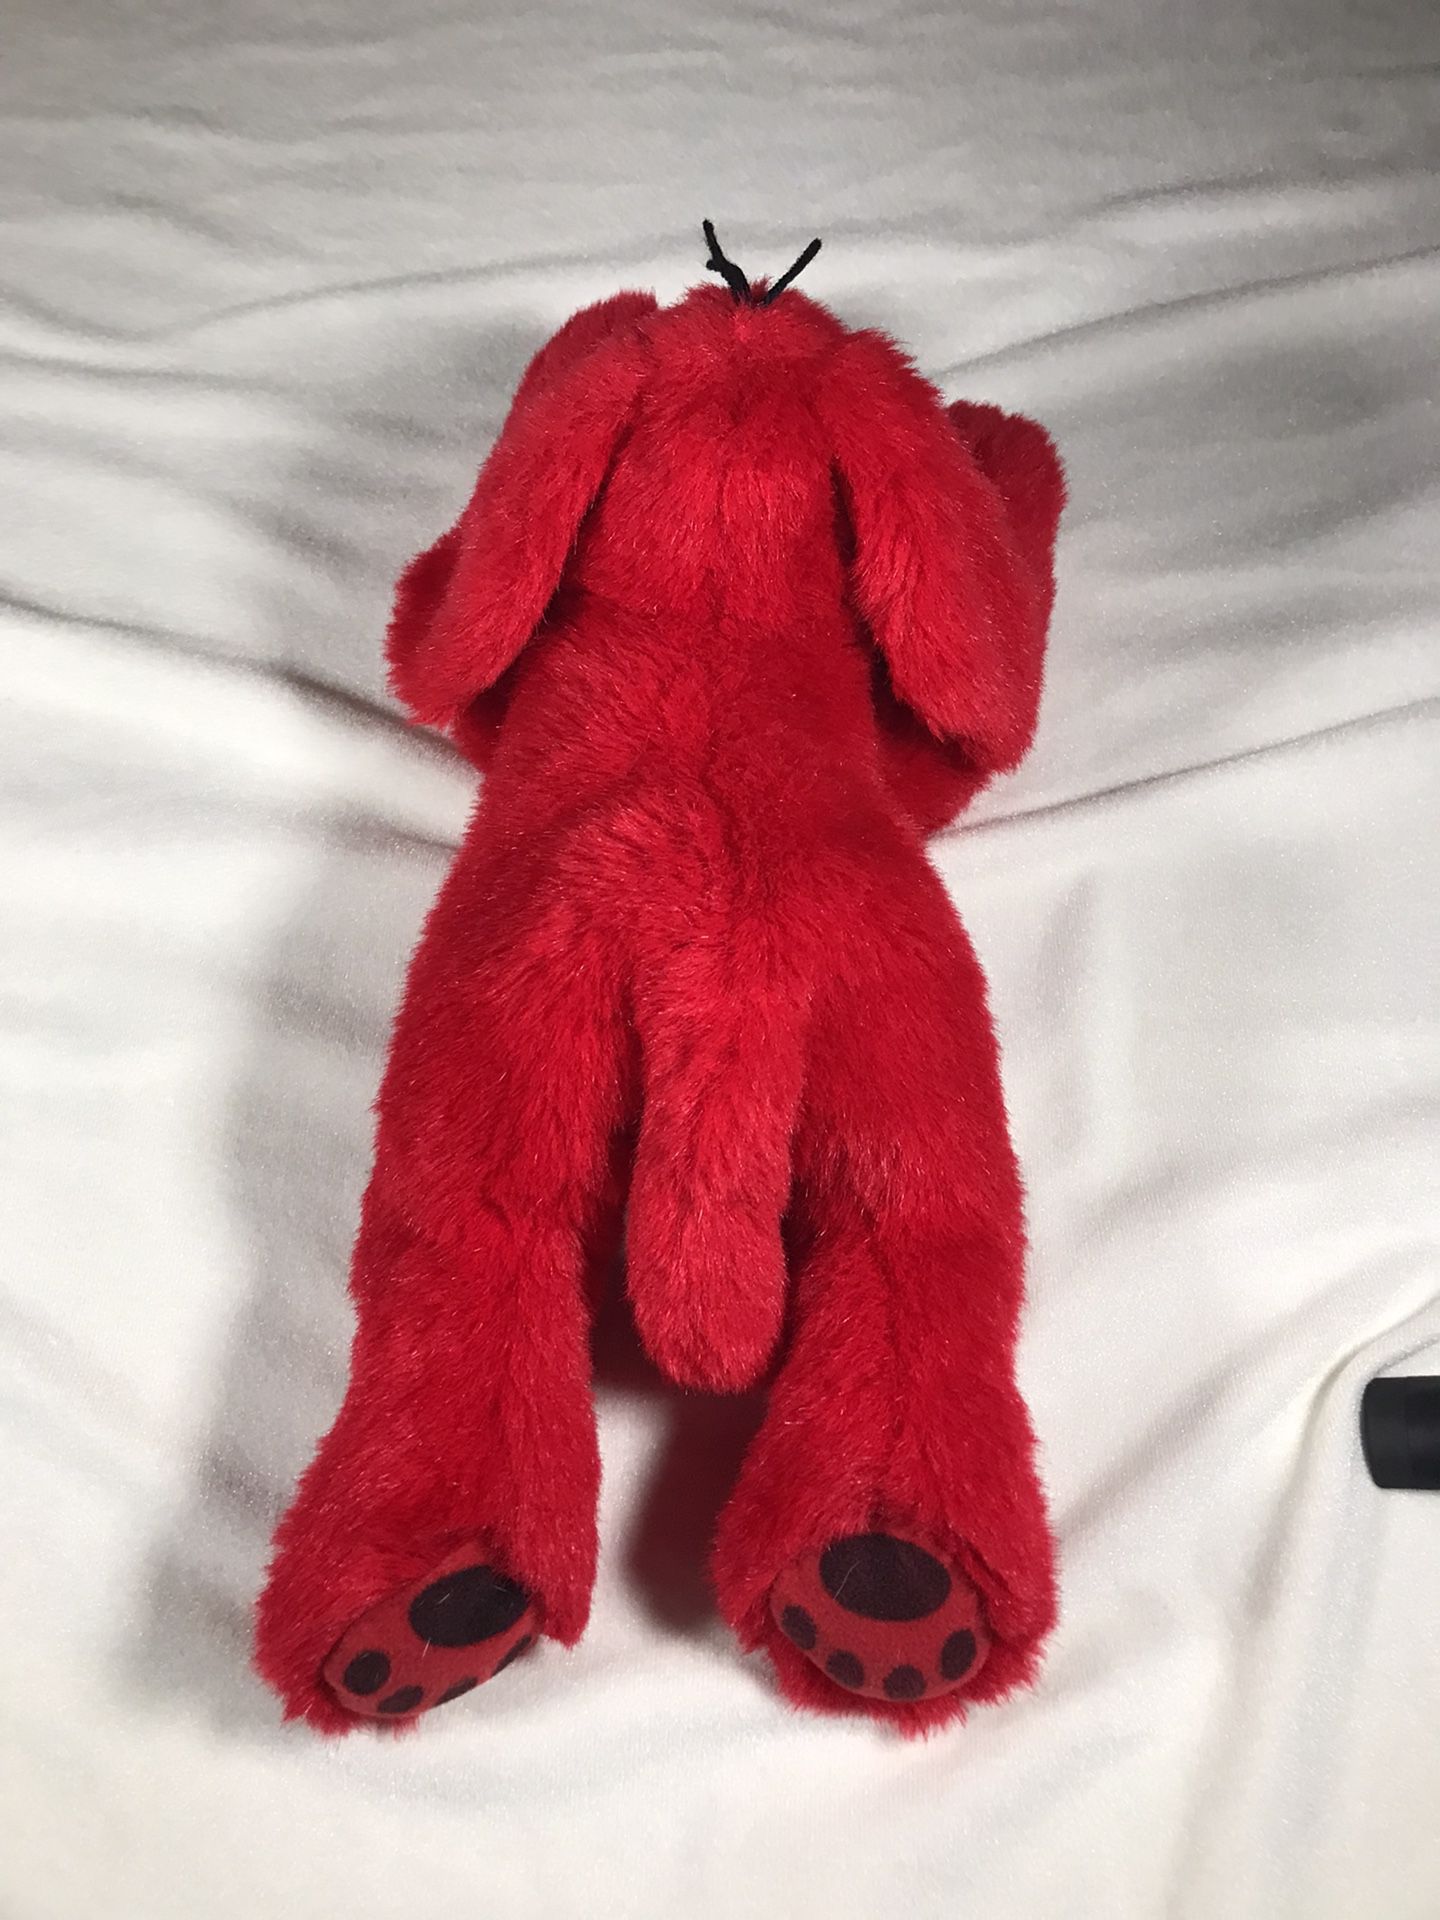 CLIFFORD THE BIG RED DOG LARGE FLOPPY PLUSH STUFFED ANIMAL LYING 1997 SCHOLASTIC Previous  Clifford the big red dog large floppy plush stuffed animal 